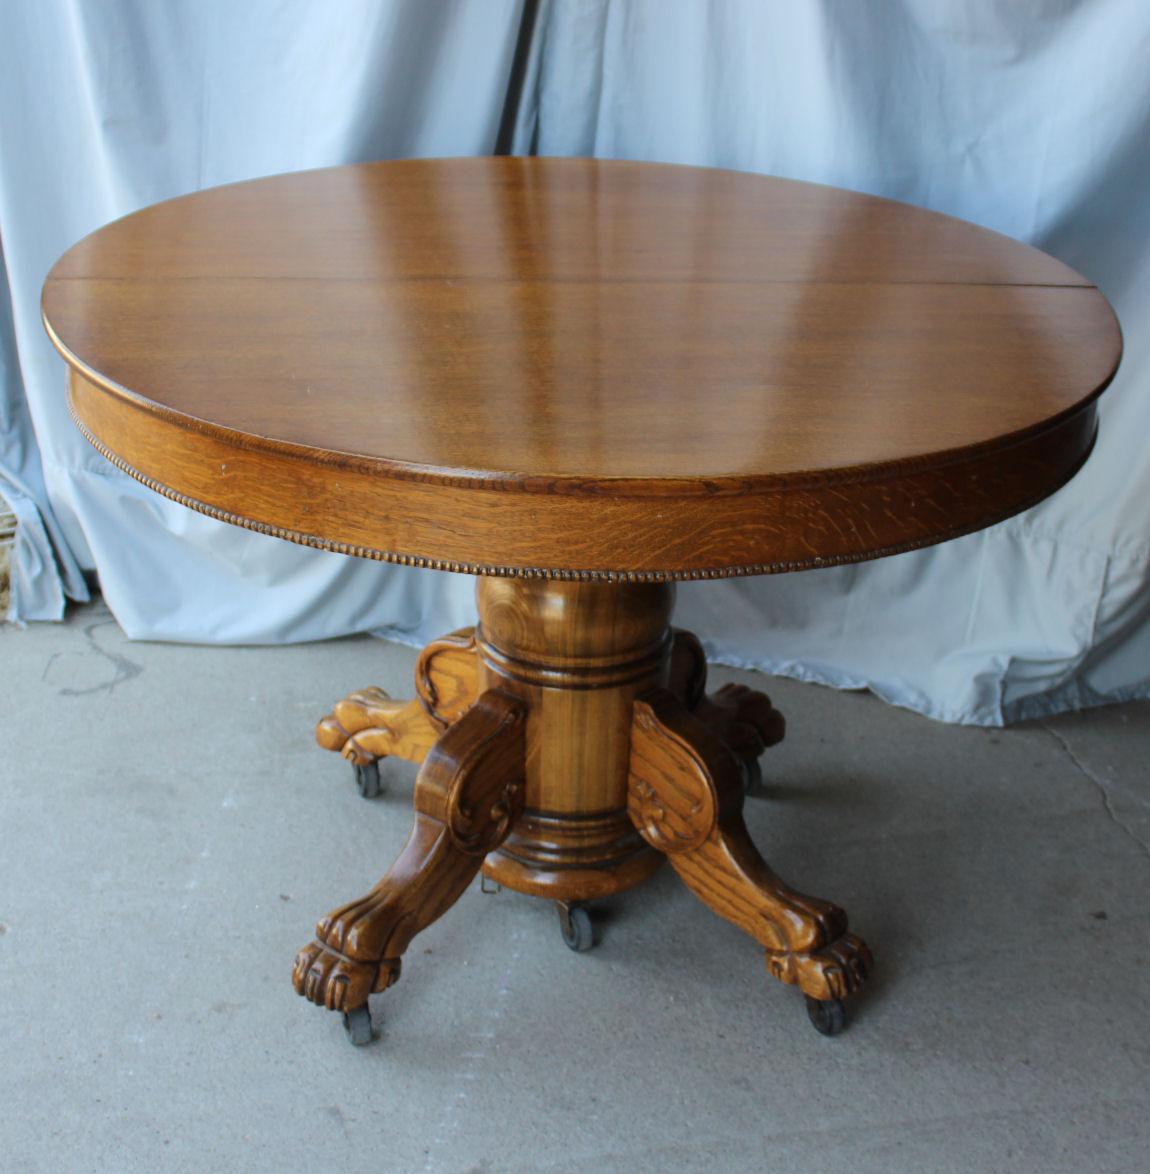 Old tables for sale